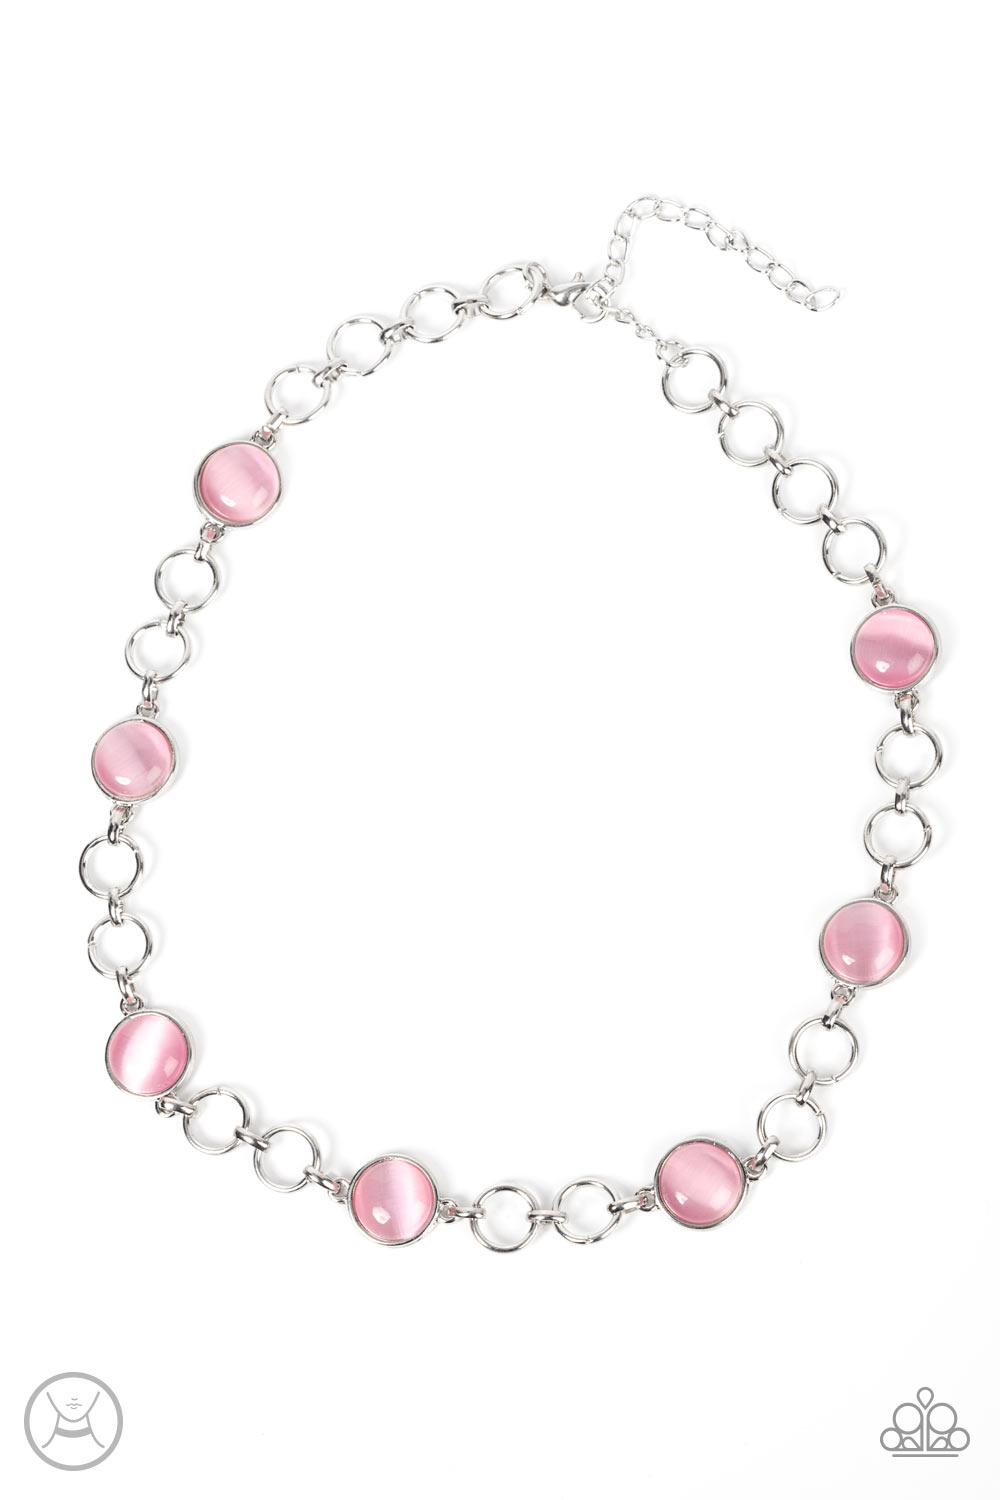 Dreamy Distractions Pink Choker Necklace - Paparazzi Accessories  Pairs of silver hoops and Pale Rosette cat's eye dotted silver frames delicately link around the neck, creating a dreamy glow. Features an adjustable clasp closure.  Sold as one individual choker necklace. Includes one pair of matching earrings.